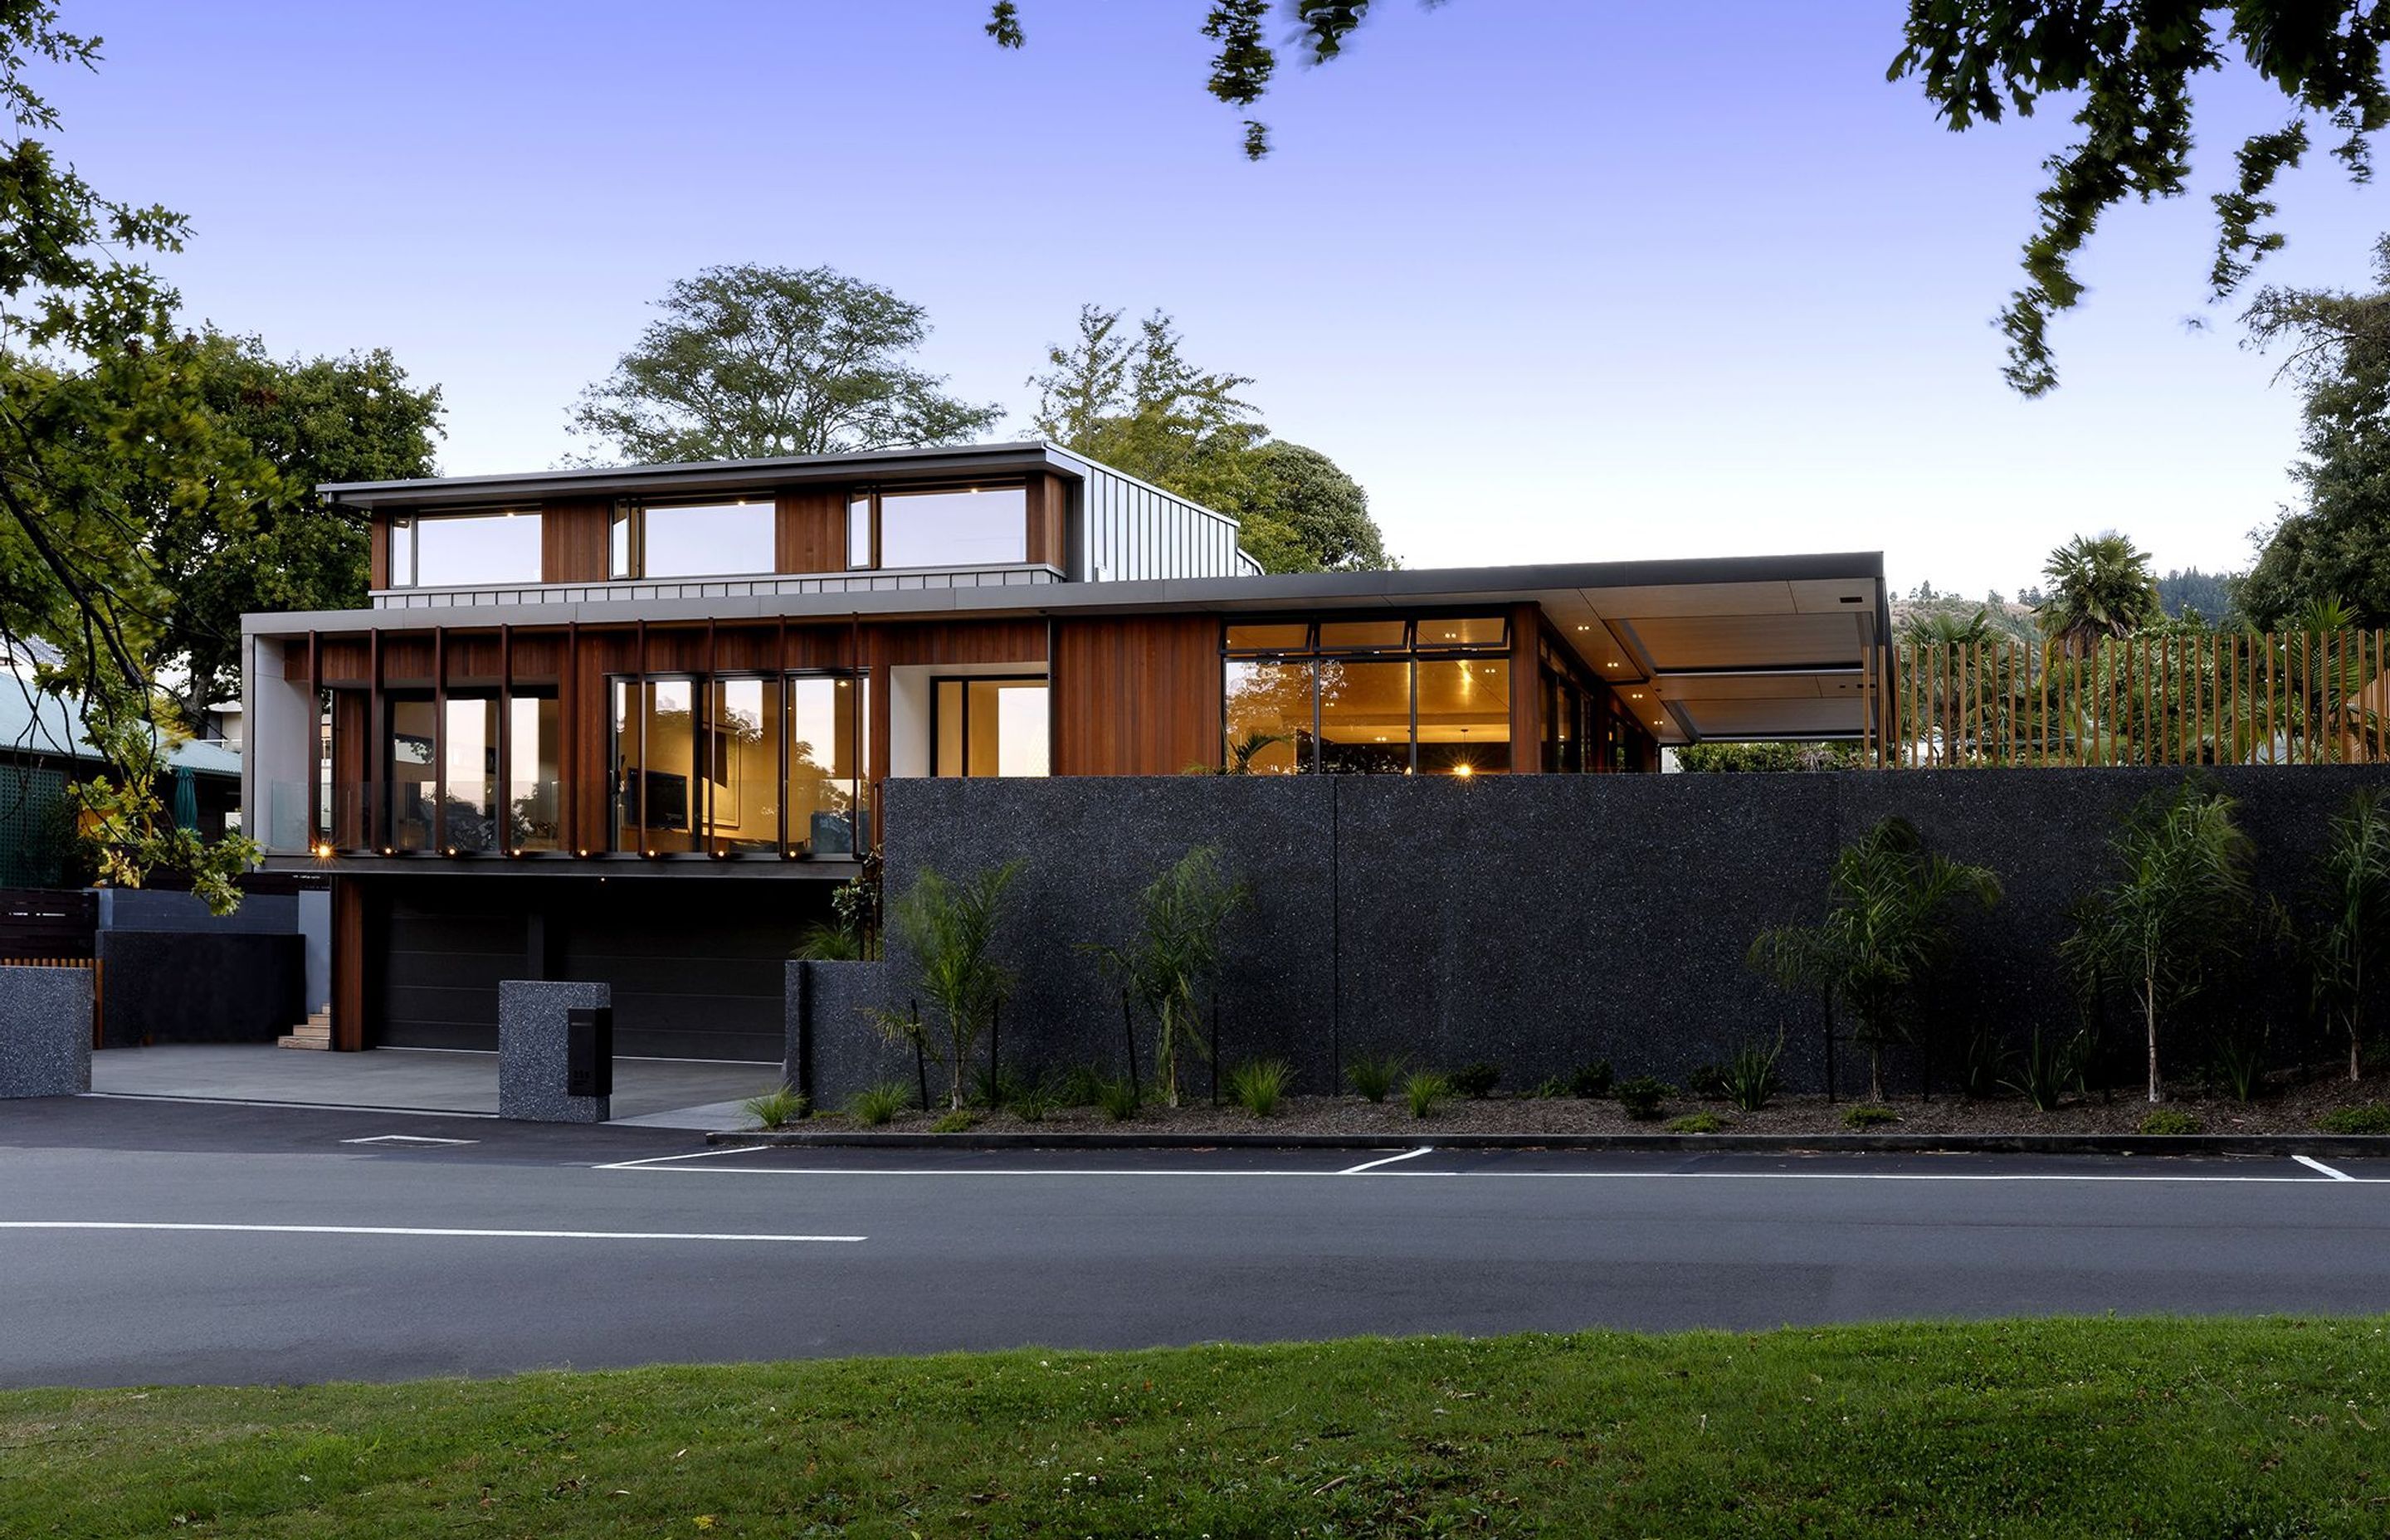 The front elevation at dusk showcases the clever articlulation of forms that help to break down the mass of the building.